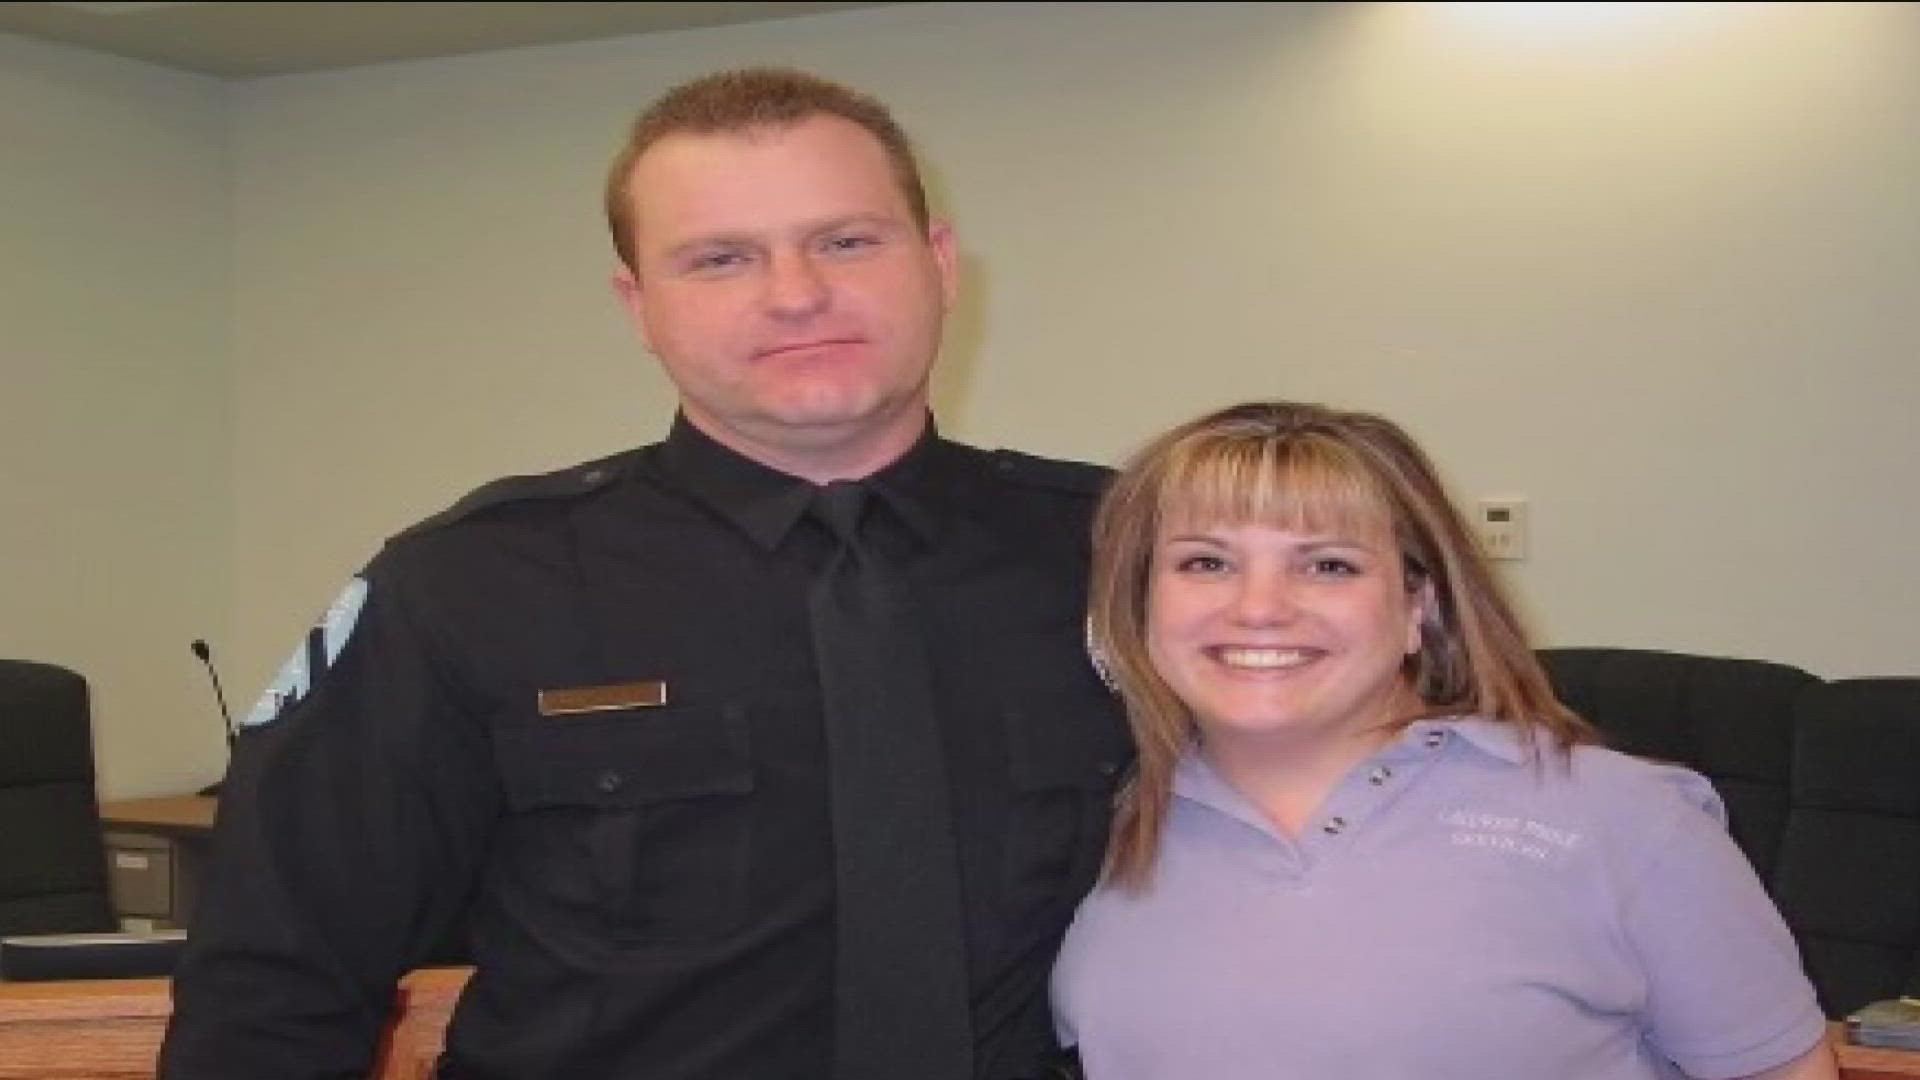 Longtime Caldwell police officer, Chad Register, served his community all the up until his death in 2016. Six years later, his wife makes sure his legacy lives on.